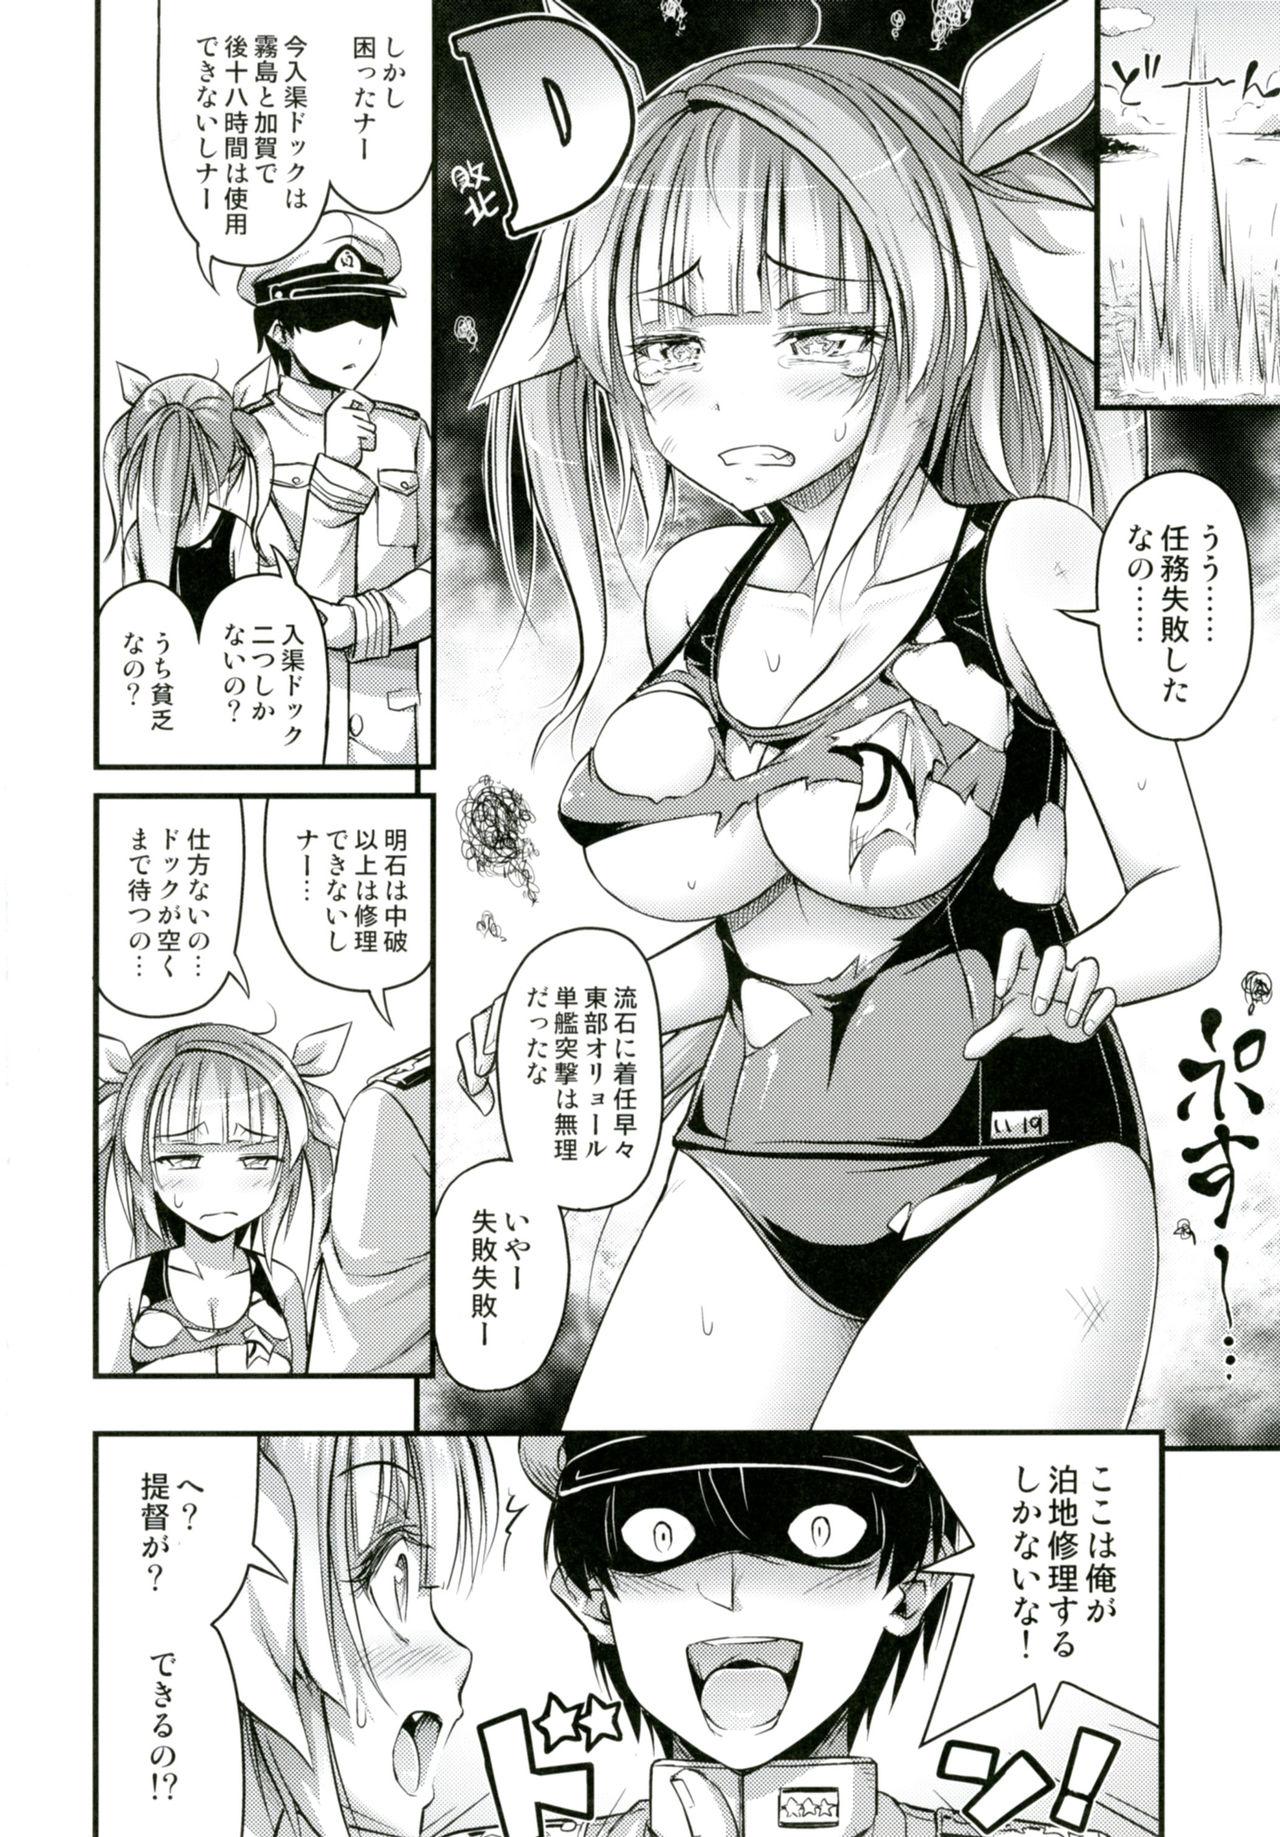 Buttfucking 19 - Kantai collection Reversecowgirl - Page 3